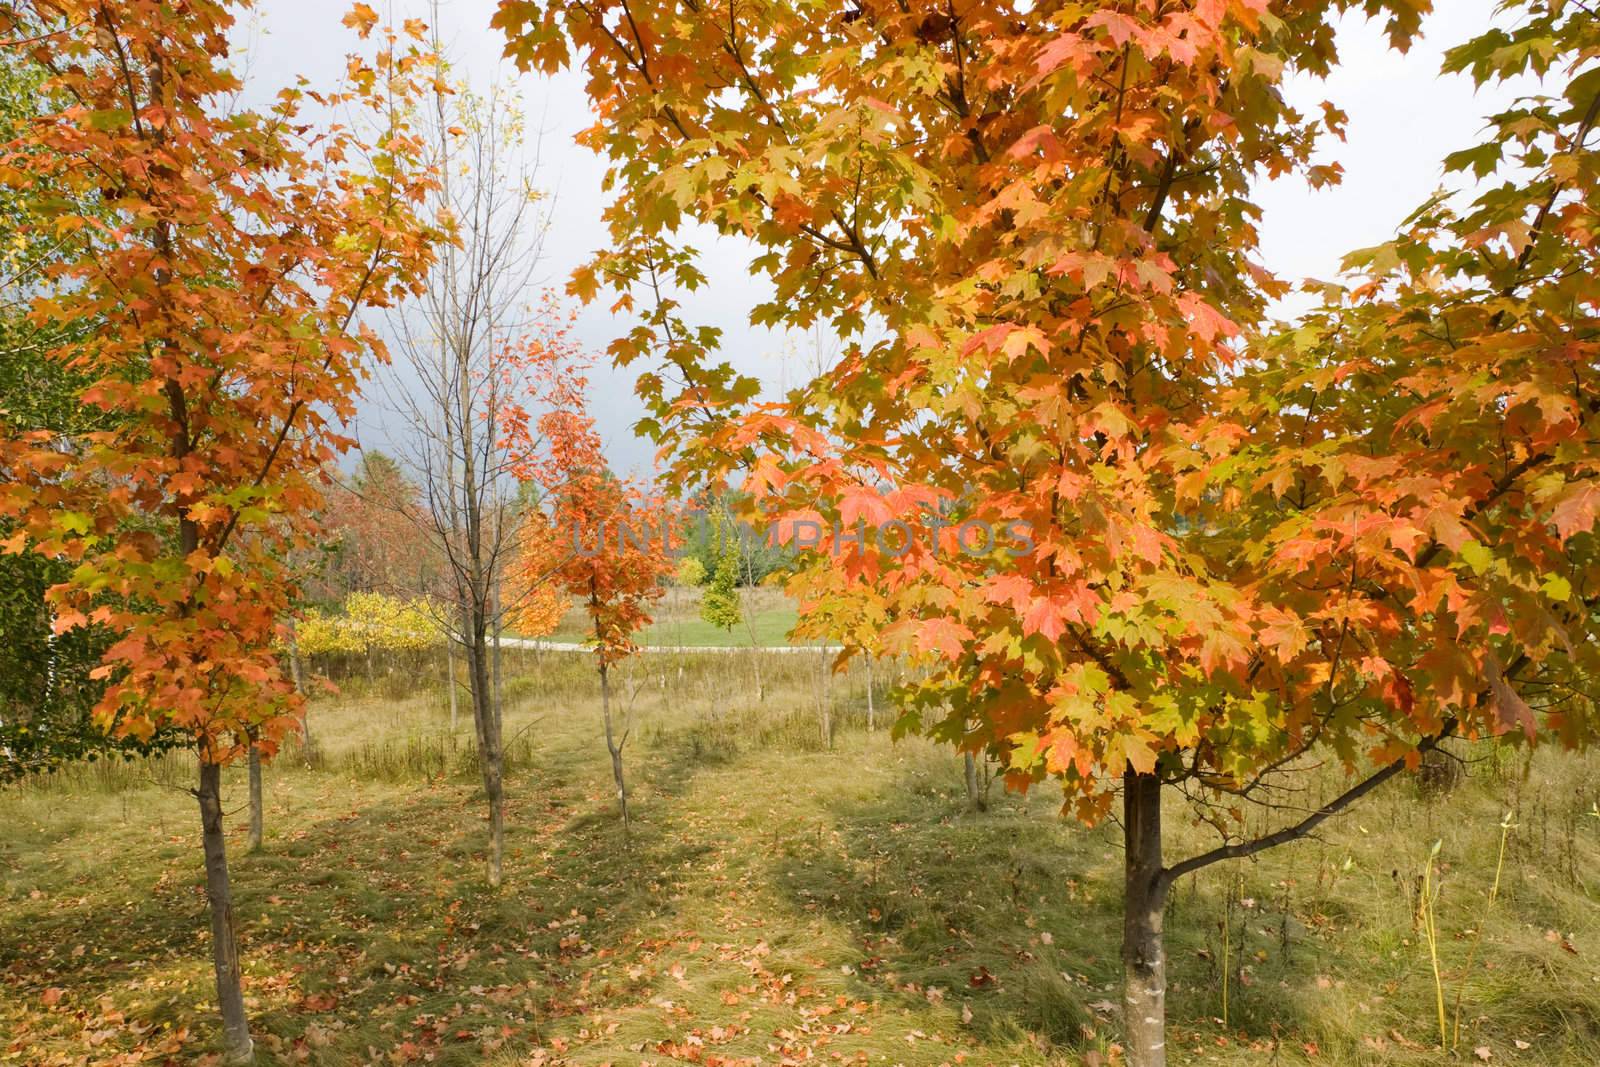 Fall colors in a park with trees at various distances.